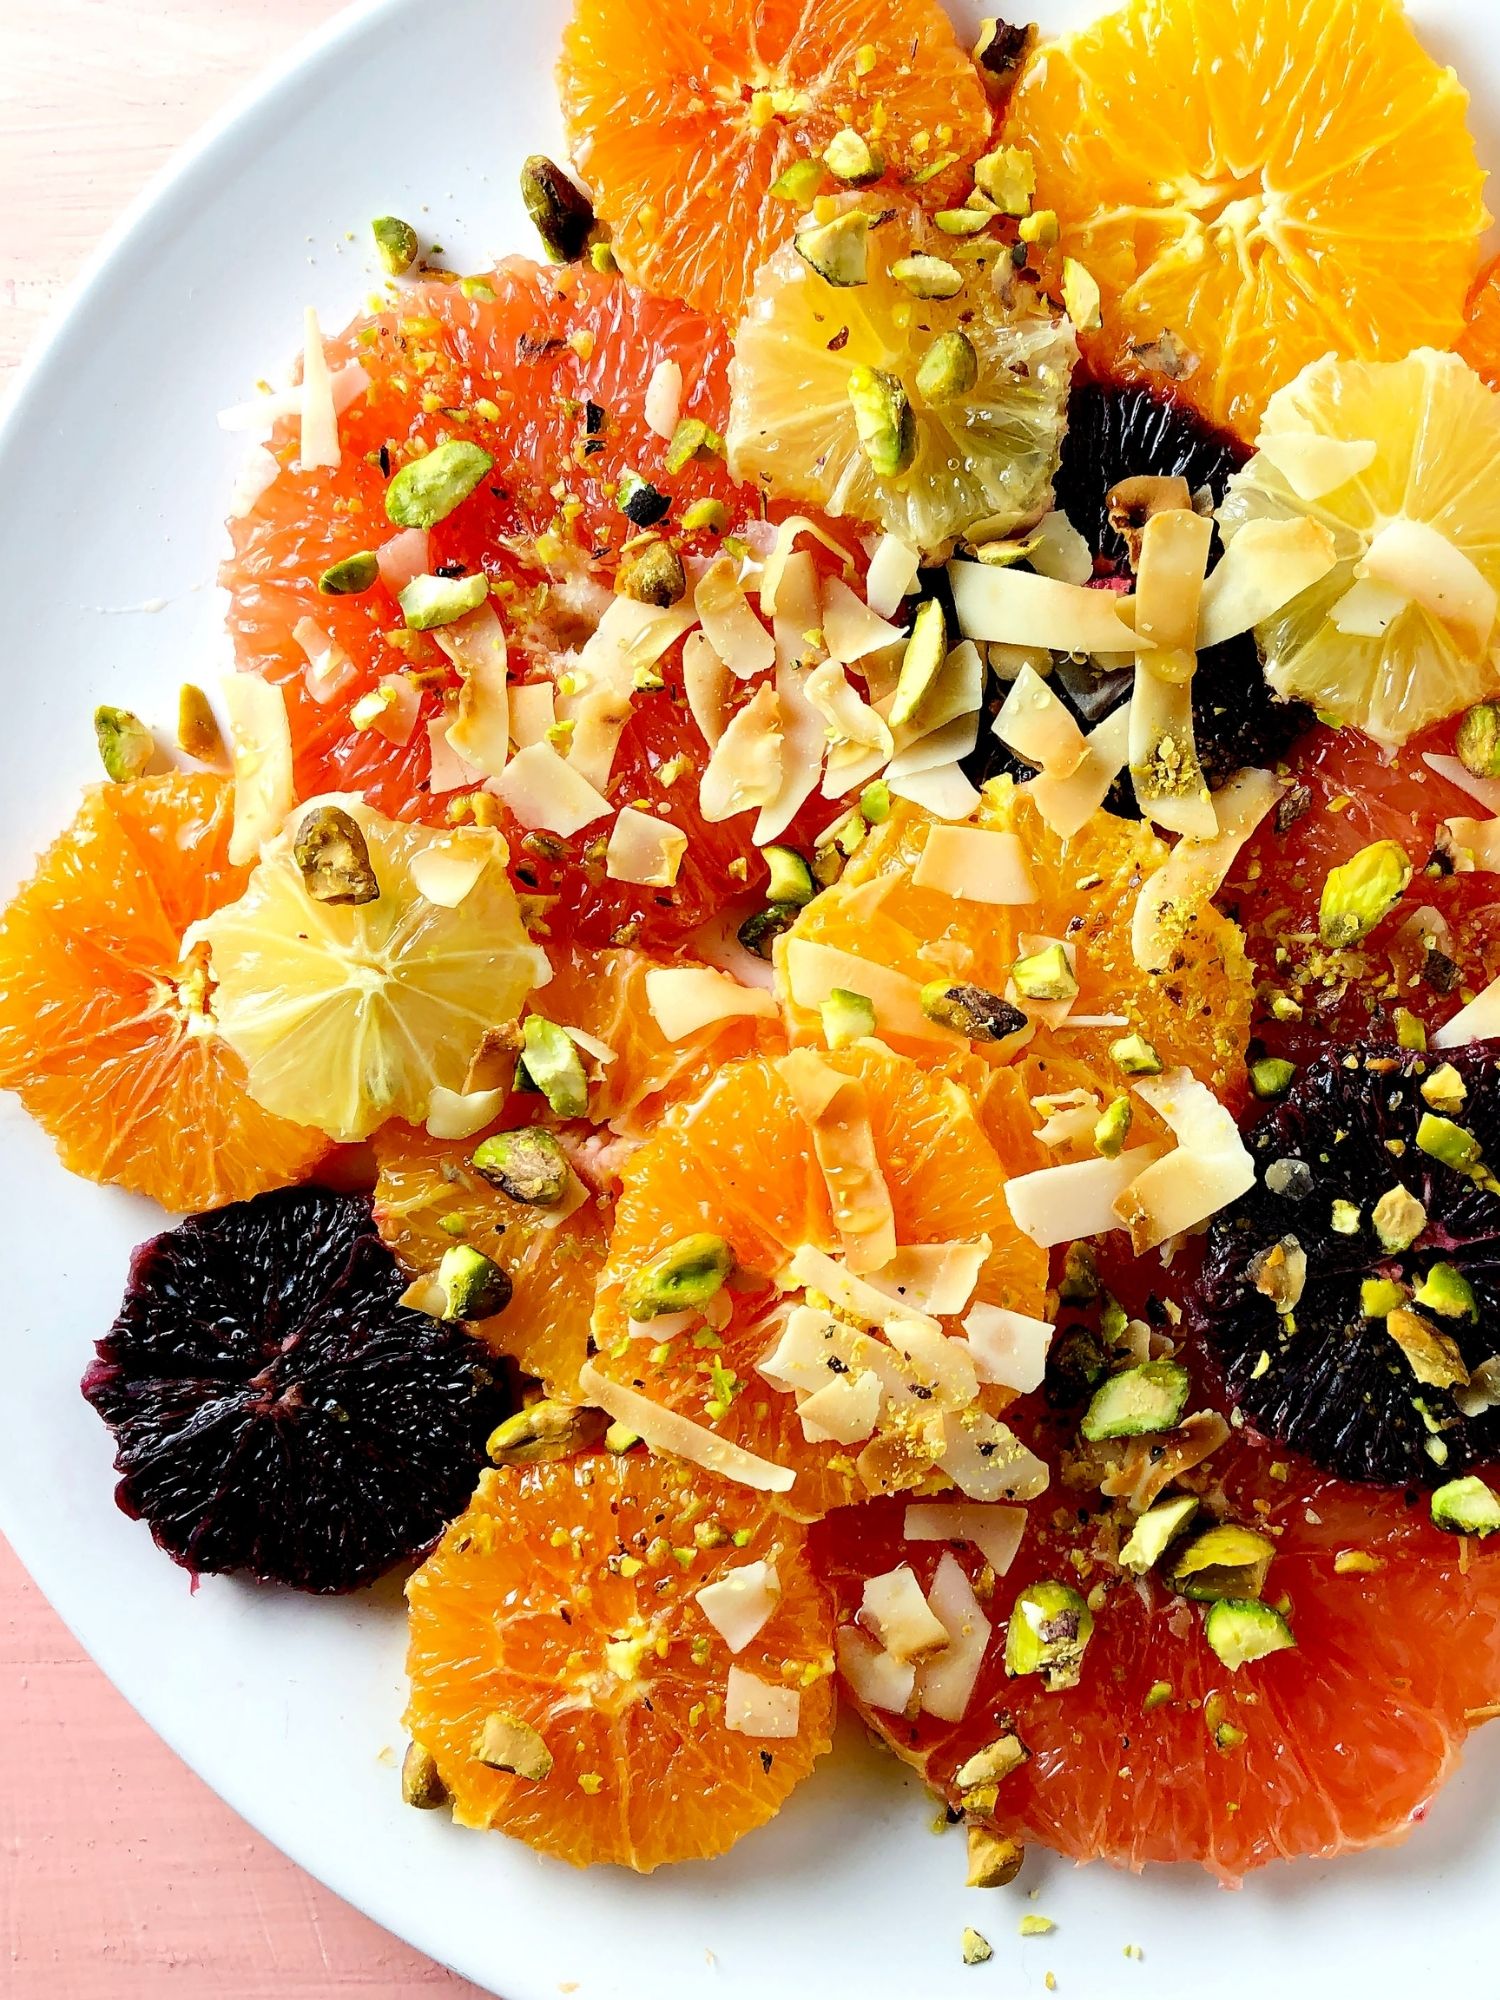 Top down view of Simple Citrus Salad with text Get Some Sun, and a top down shot of the salad – slices of pink grapefruit, navel oranges, tangelos, blood oranges, and lemon, garnished with ribbons of toasted coconut, crushed pistachios and honey.